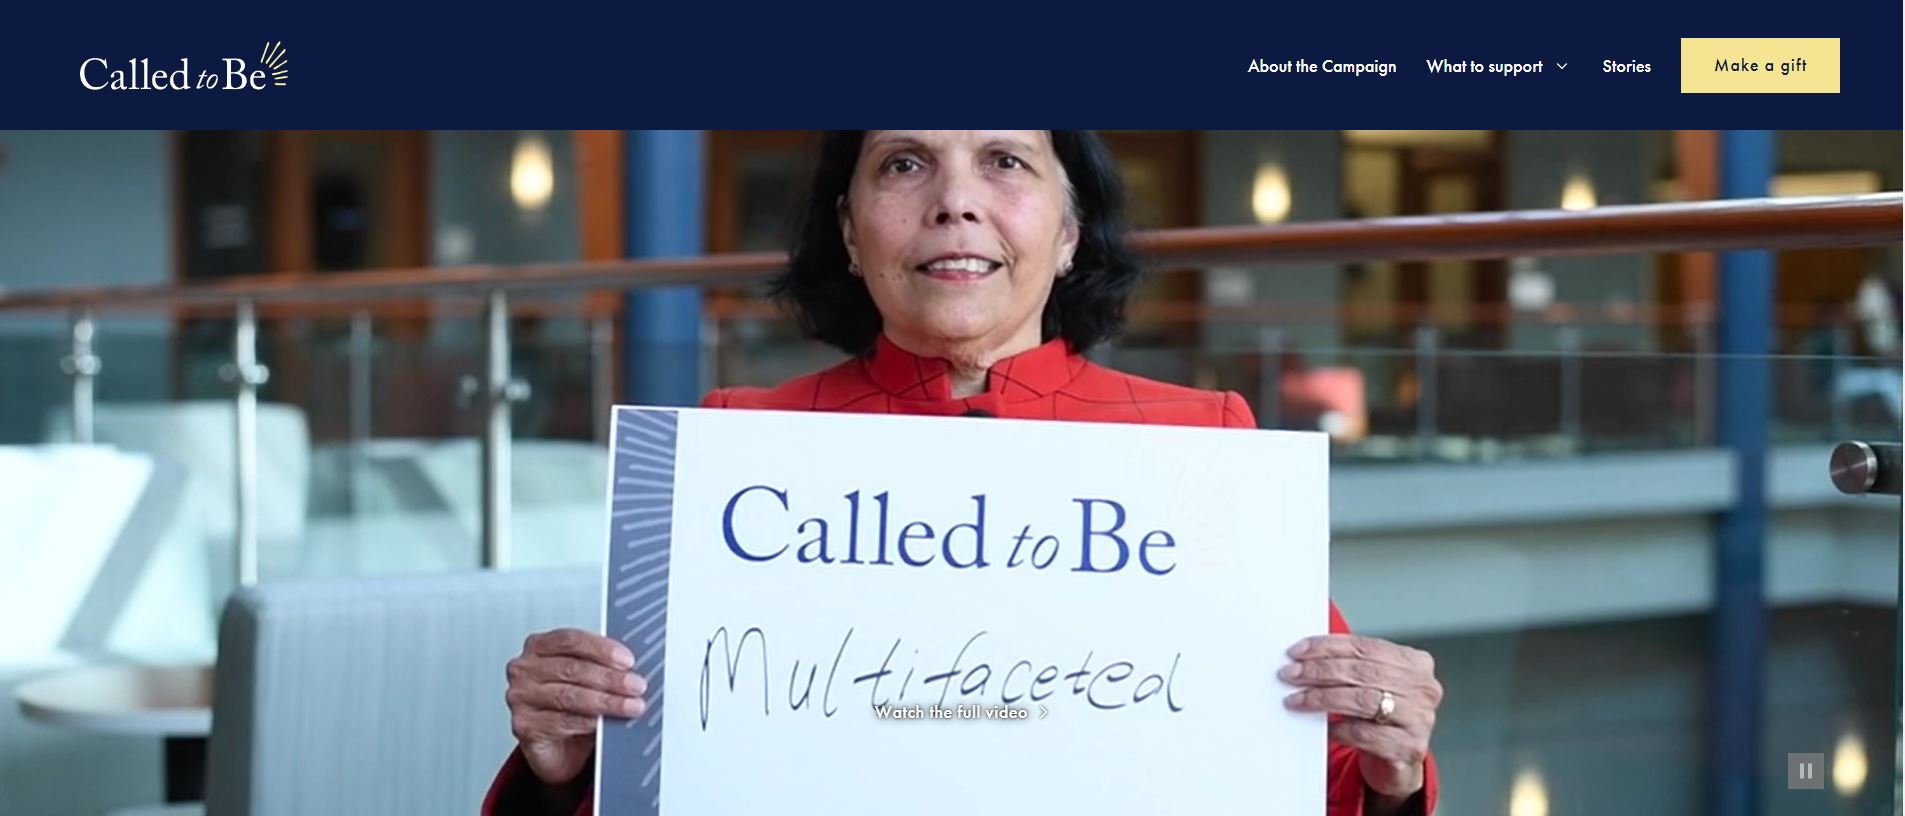 Called to Be - Georgetown’s Campaign Website